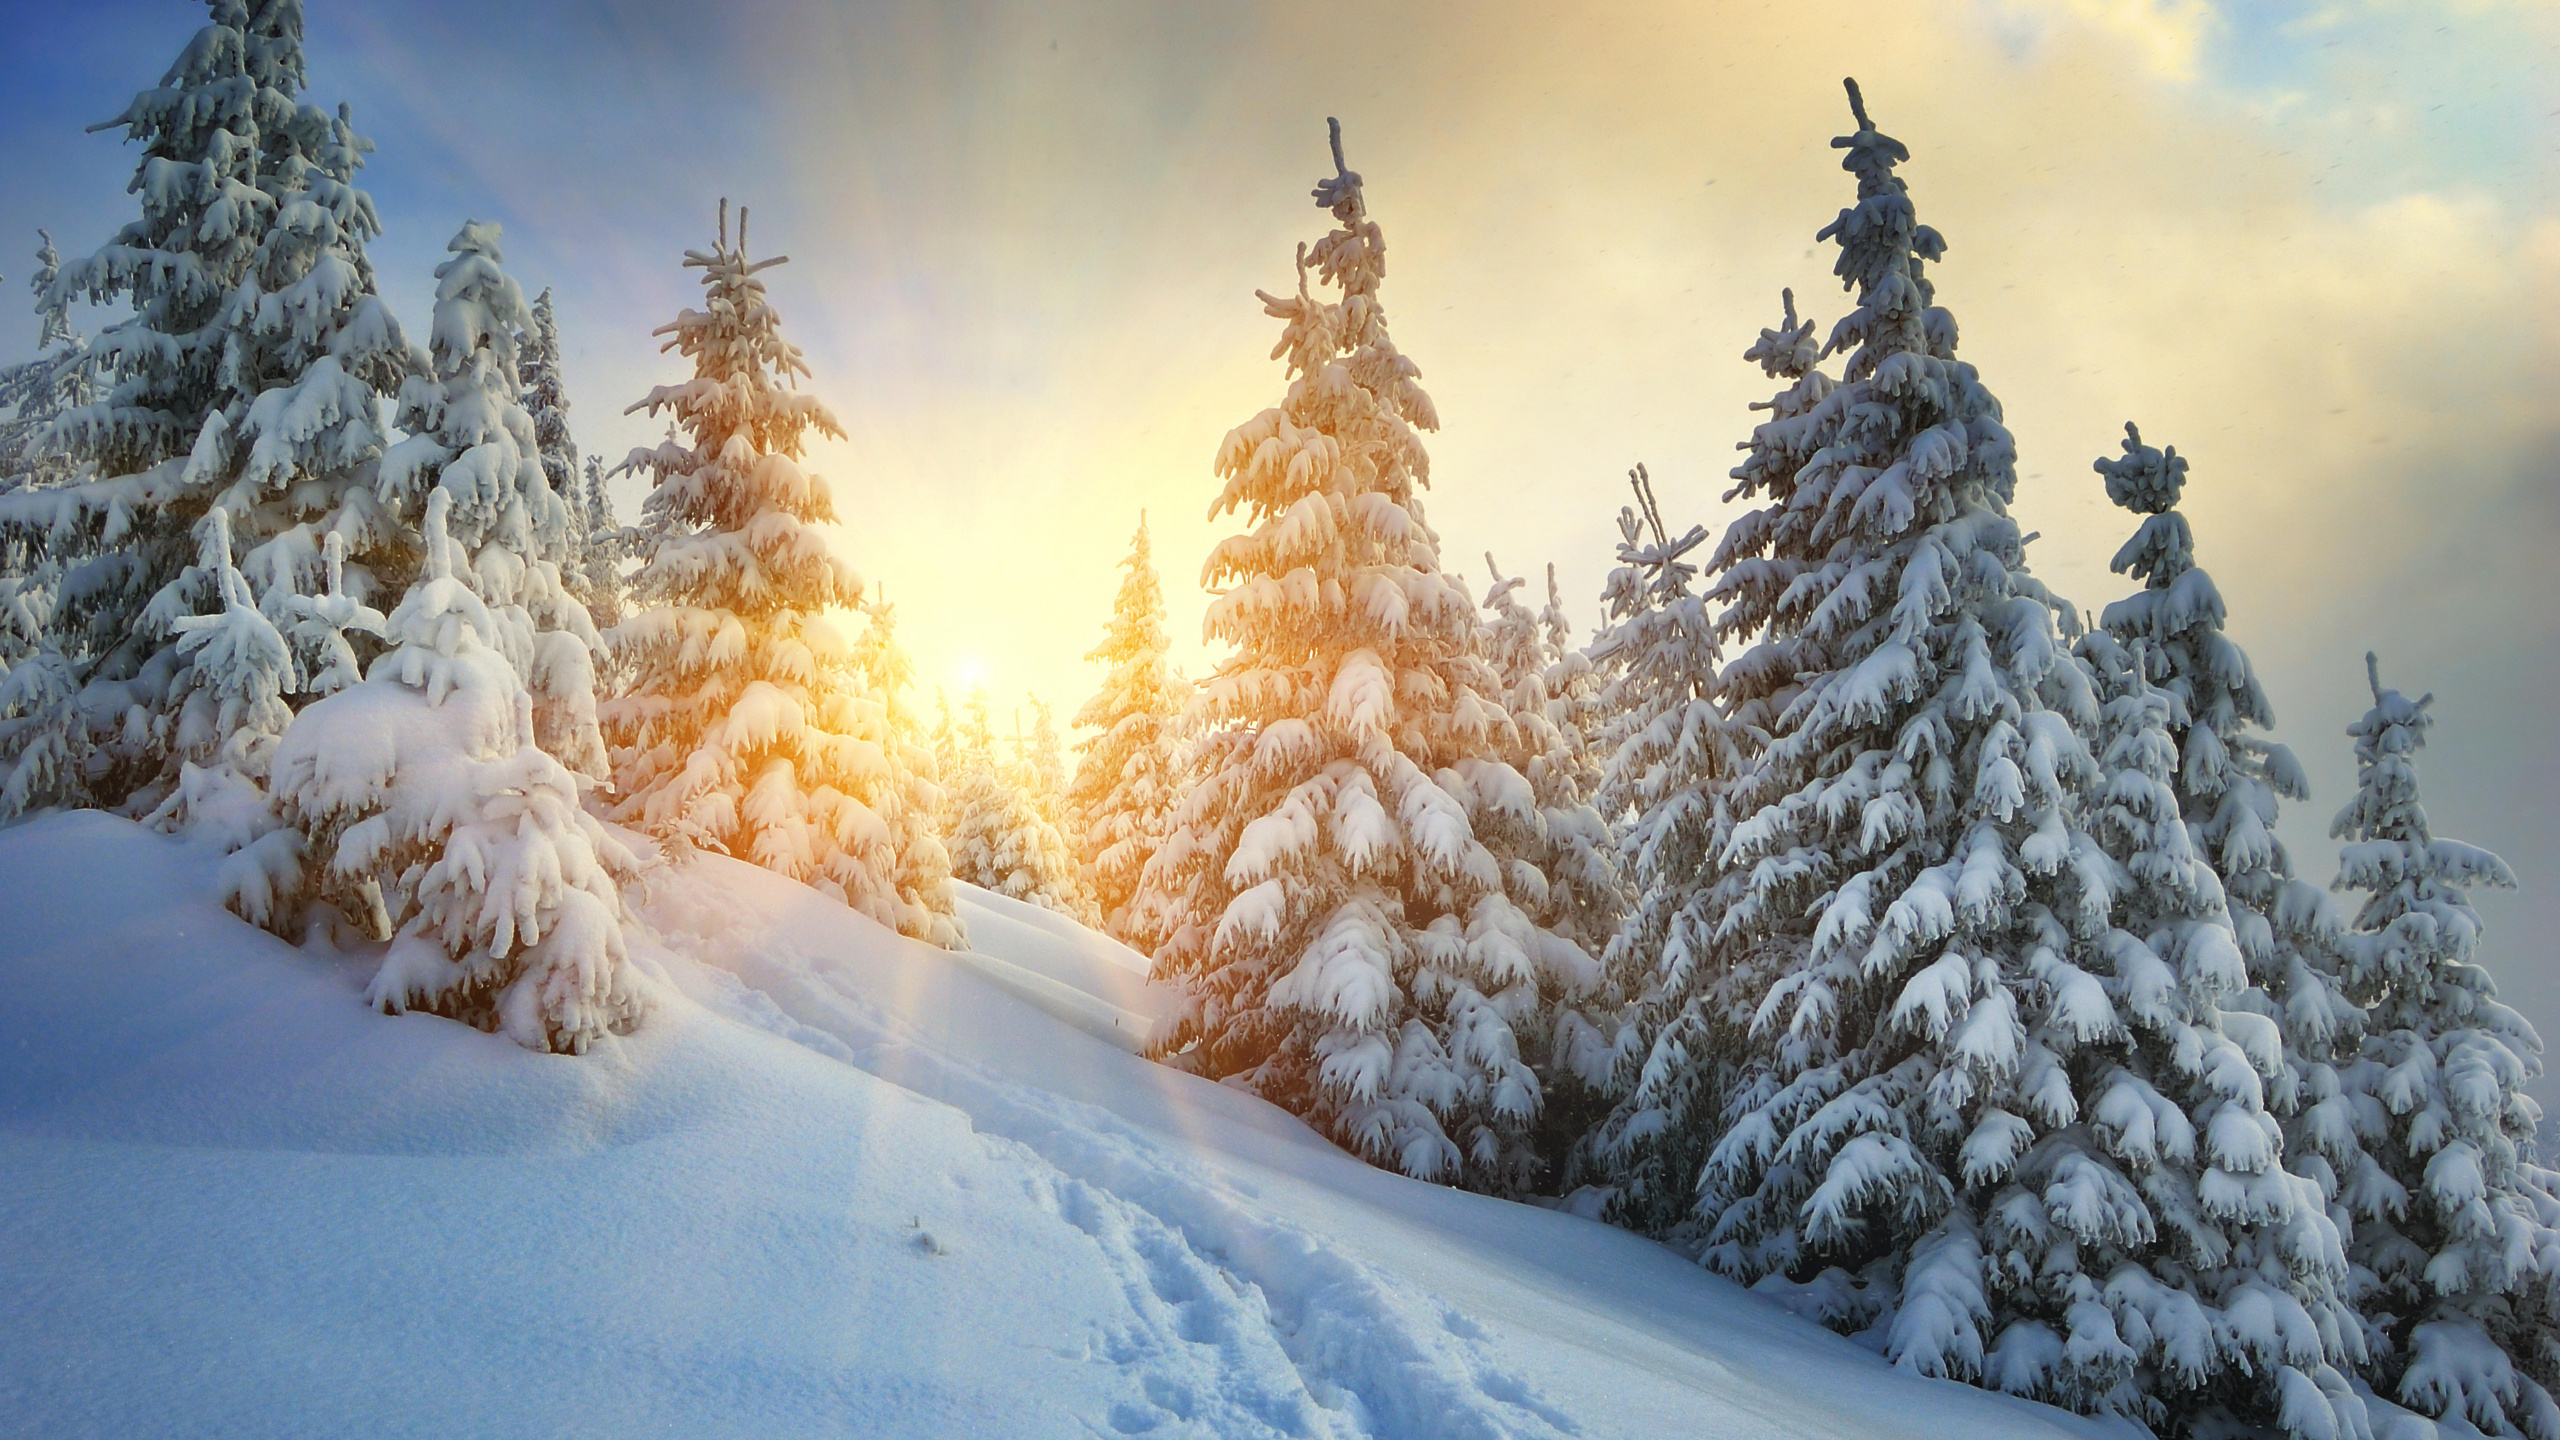 Snow Covered Pine Trees During Daytime. Wallpaper in 2560x1440 Resolution